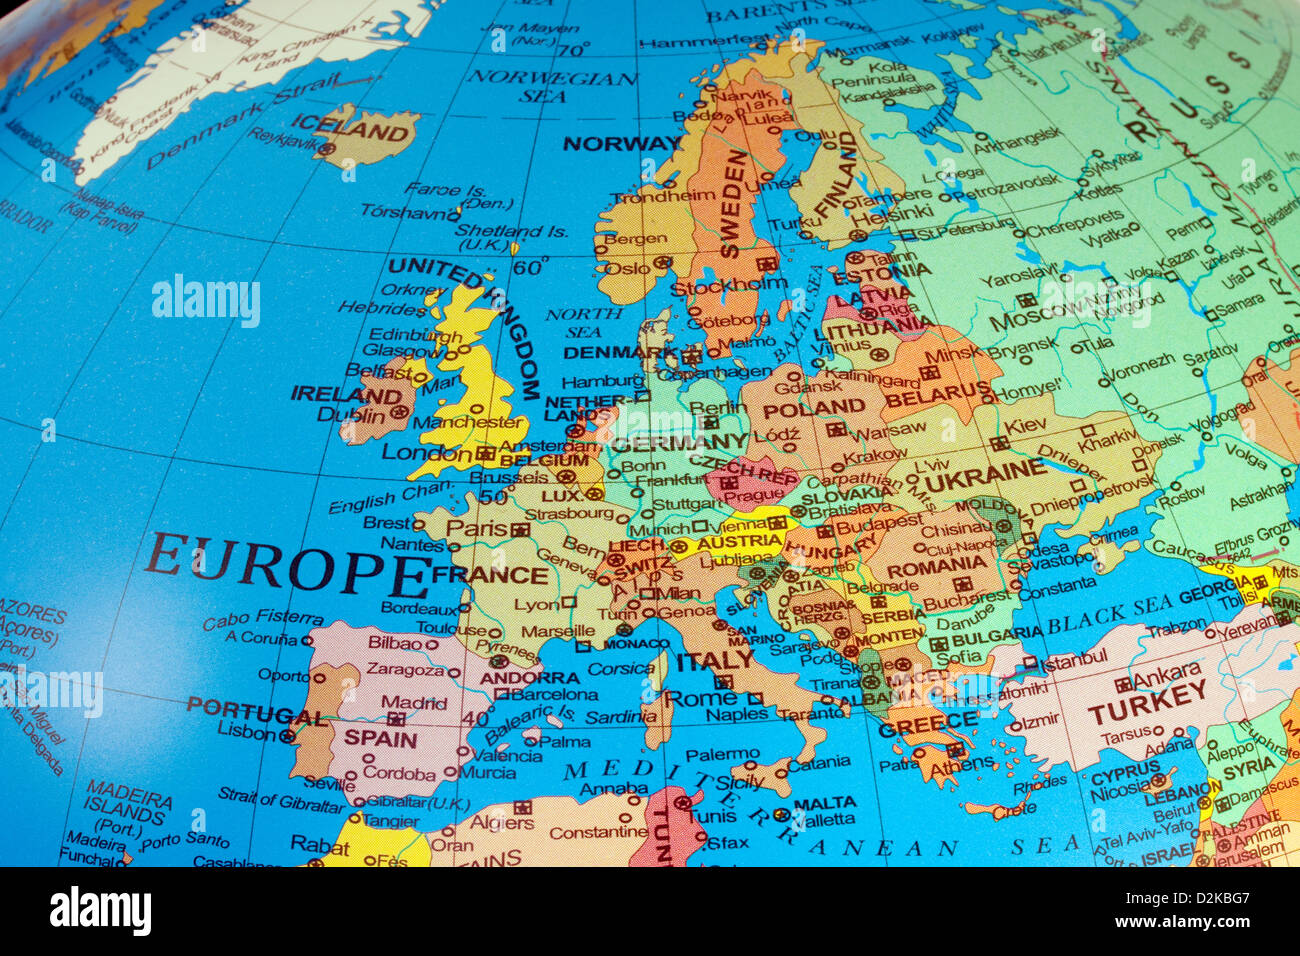 Europe map; A map of Europe continent showing the countries on a globe, 2013 Stock Photo